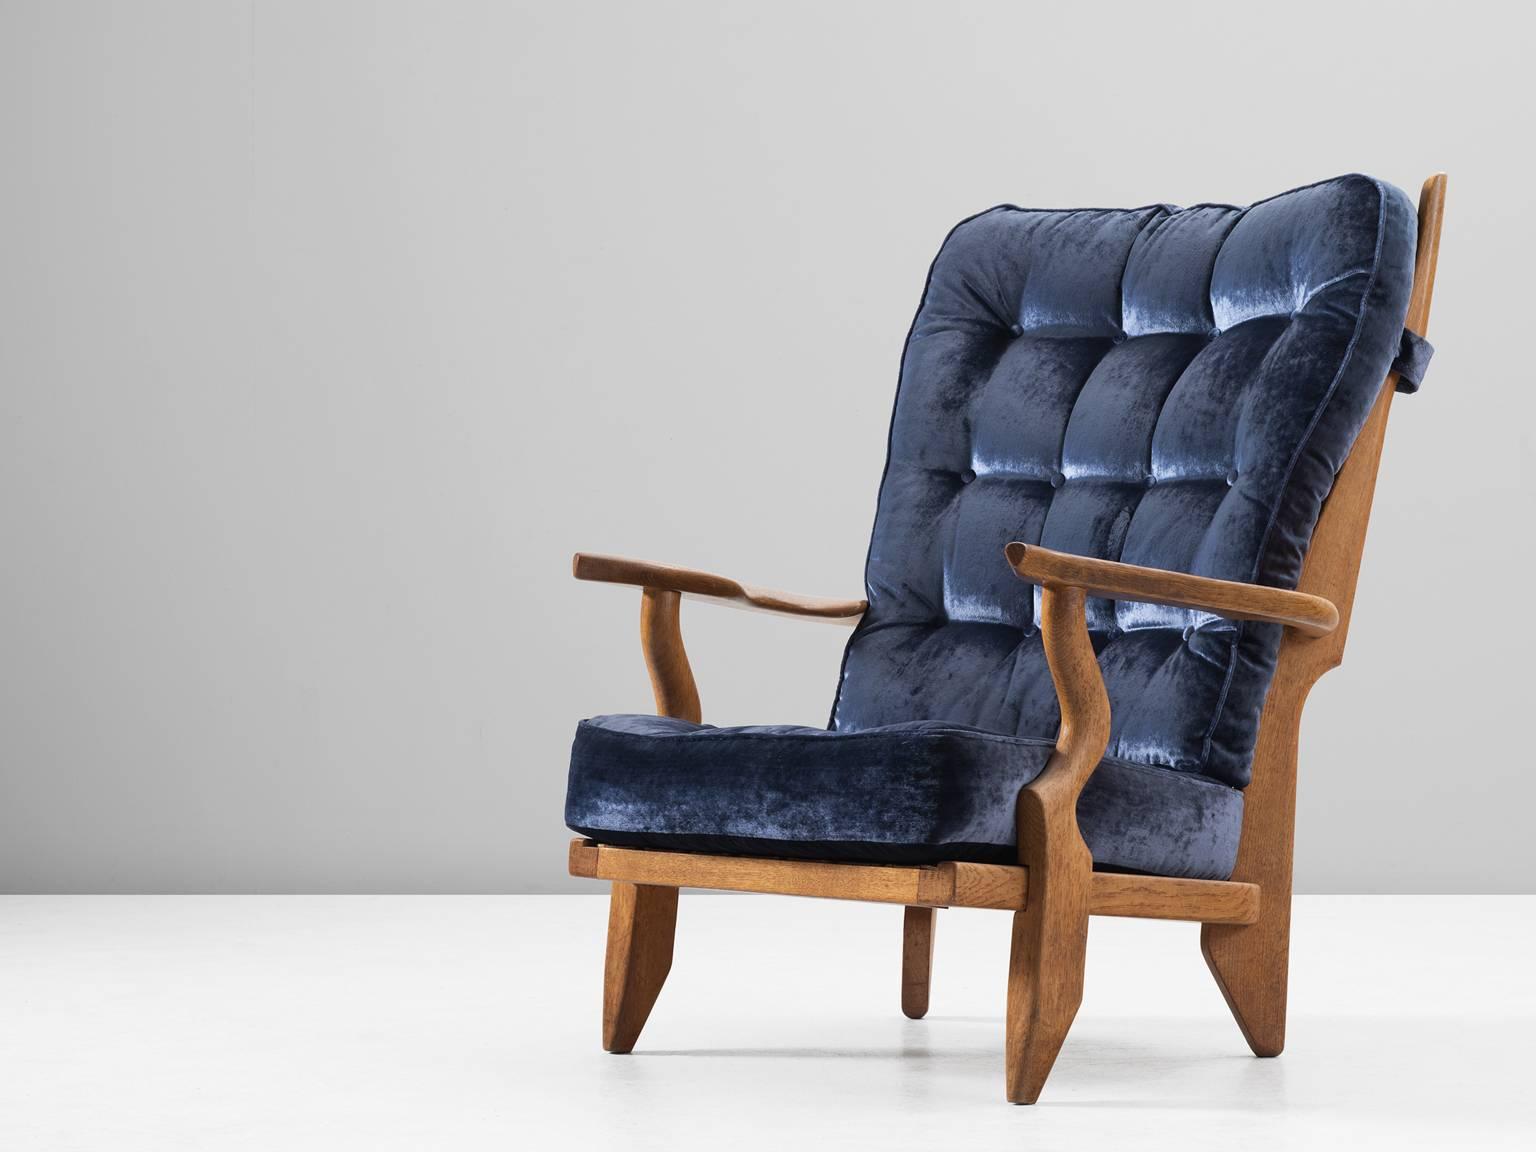 Guillerme et Chambron, 'Grand Repos' lounge chair, in oak and fabric, France 1960.

Extraordinary Guillerme & Chambron high back lounge chair, in solid oak with the typical characteristic decorative details at the back and capricious forms of the